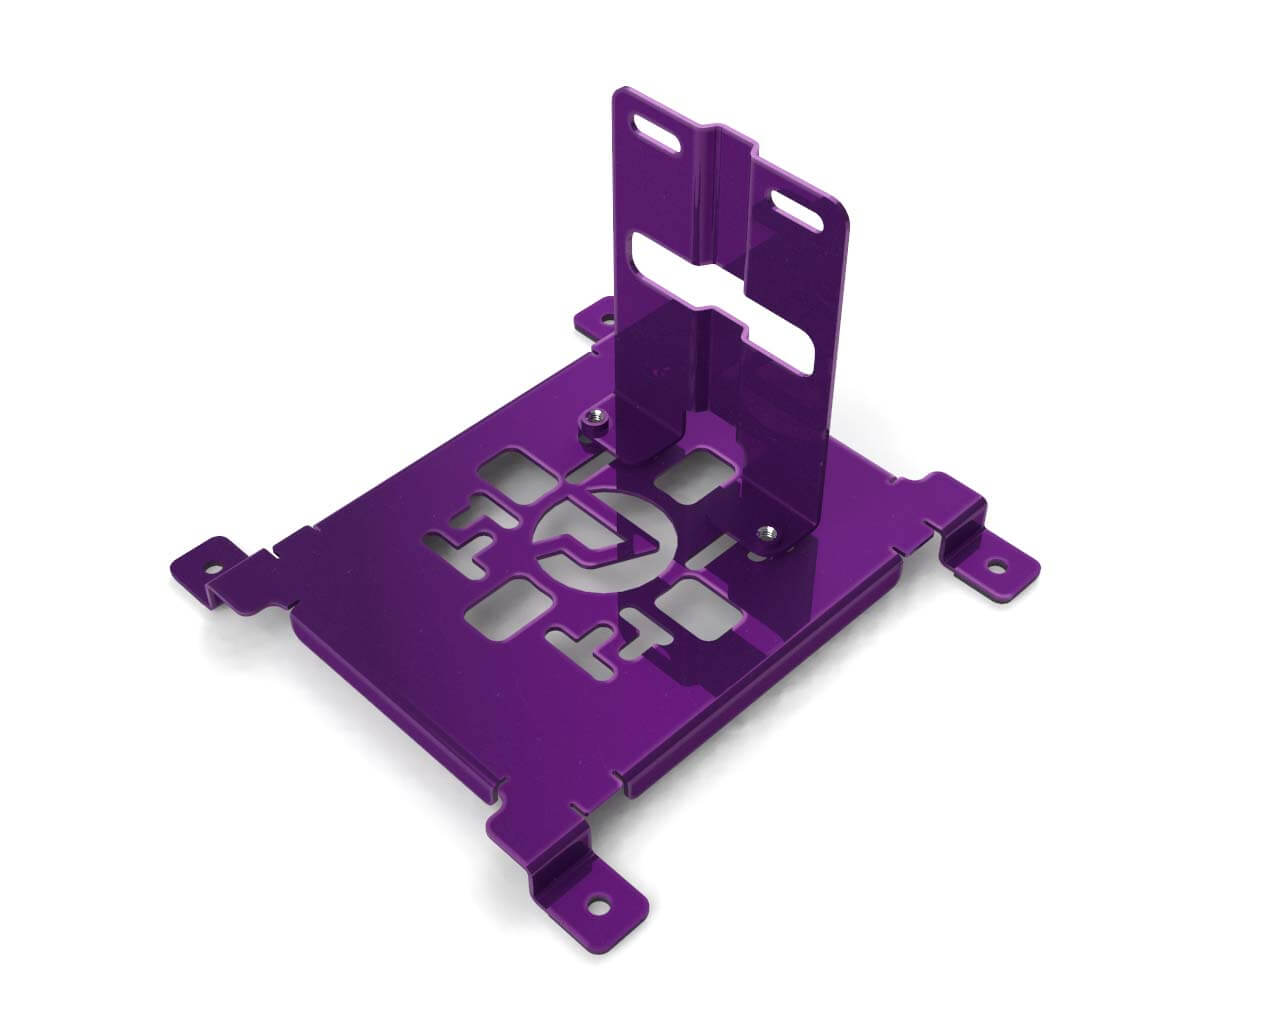 PrimoChill SX CTR2 Spider Mount Bracket Kit - 140mm Series - PrimoChill - KEEPING IT COOL Candy Purple